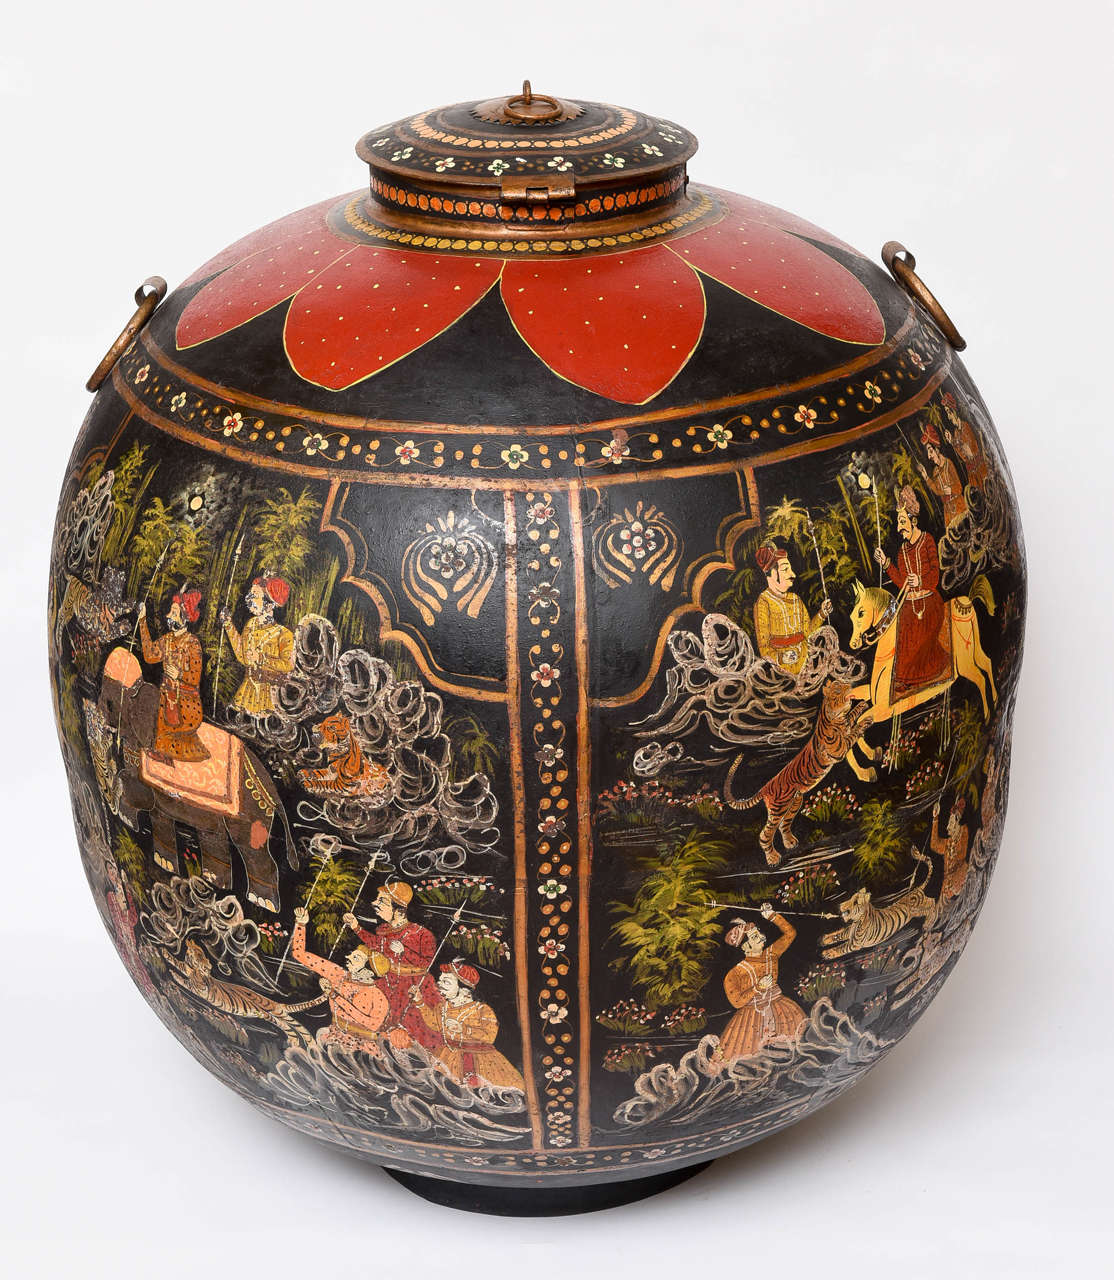 The piece is fashioned with royal figures atop elephants and horses, as well as tiger hunting scenes.
An outstanding 19th century decorative accent.